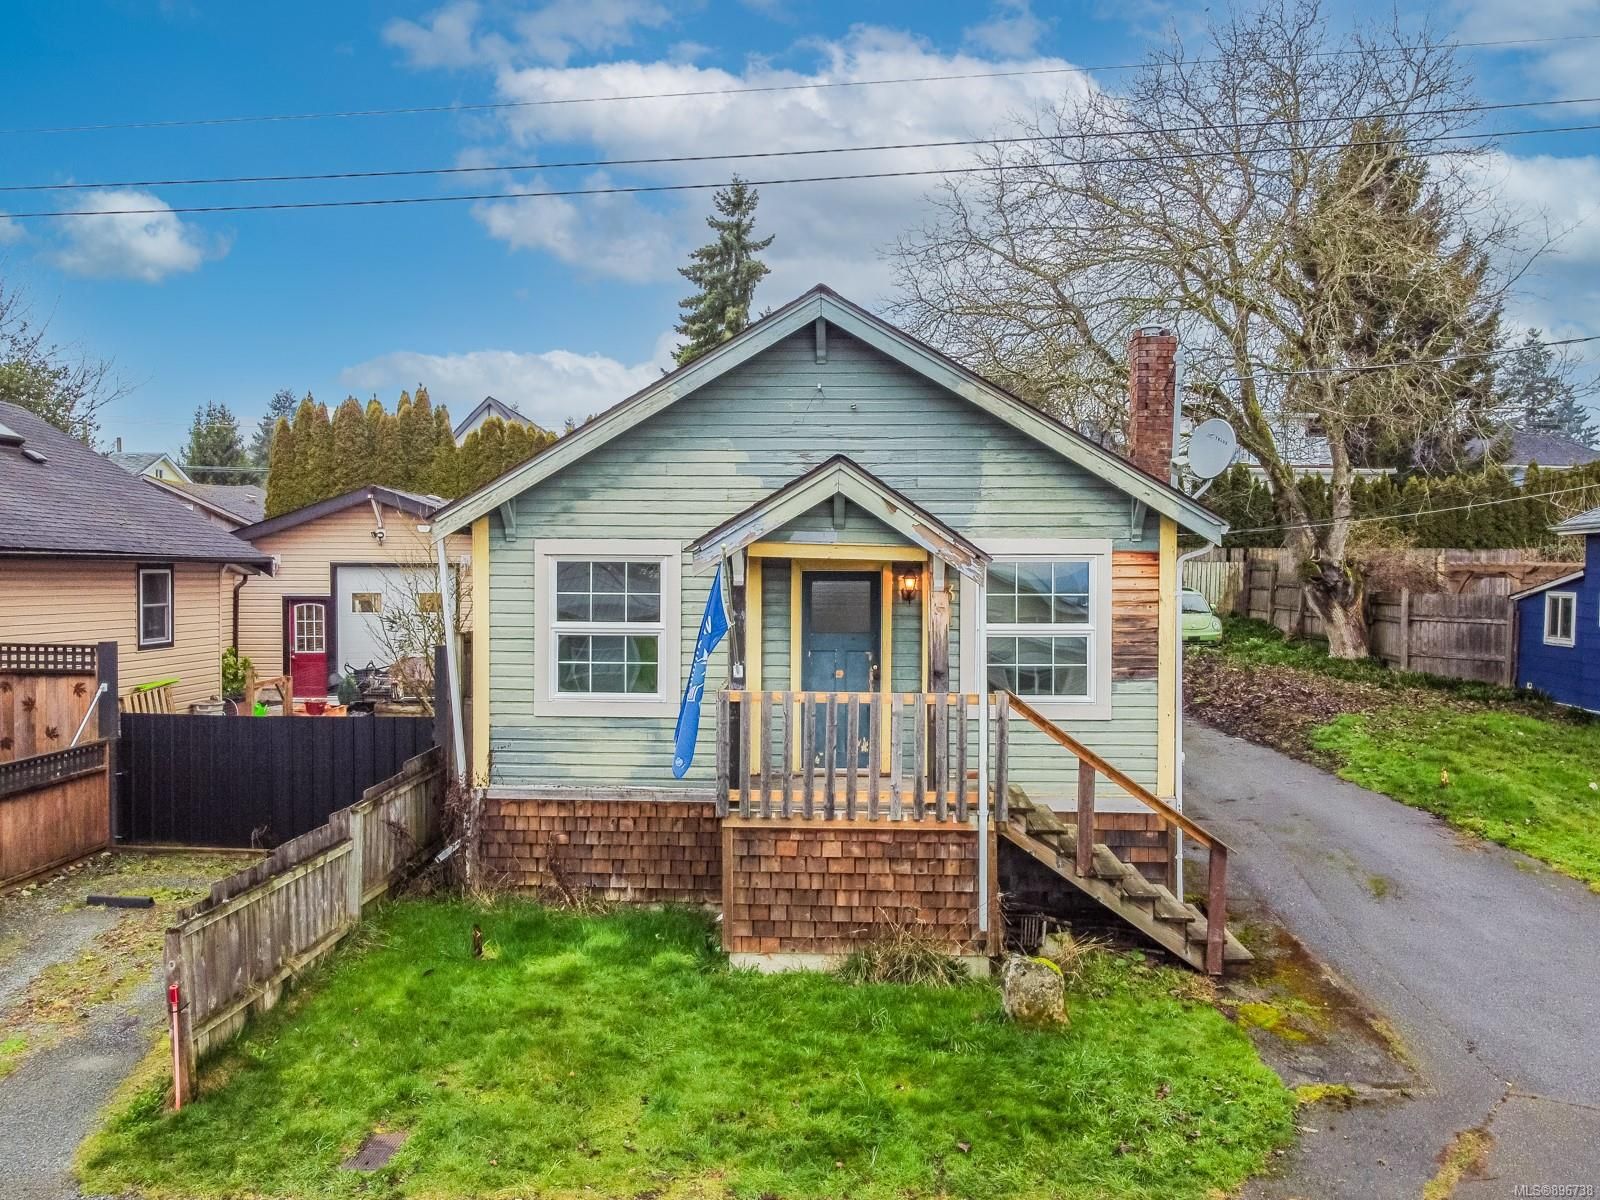 I have sold a property at 31 Gillespie St in Nanaimo
